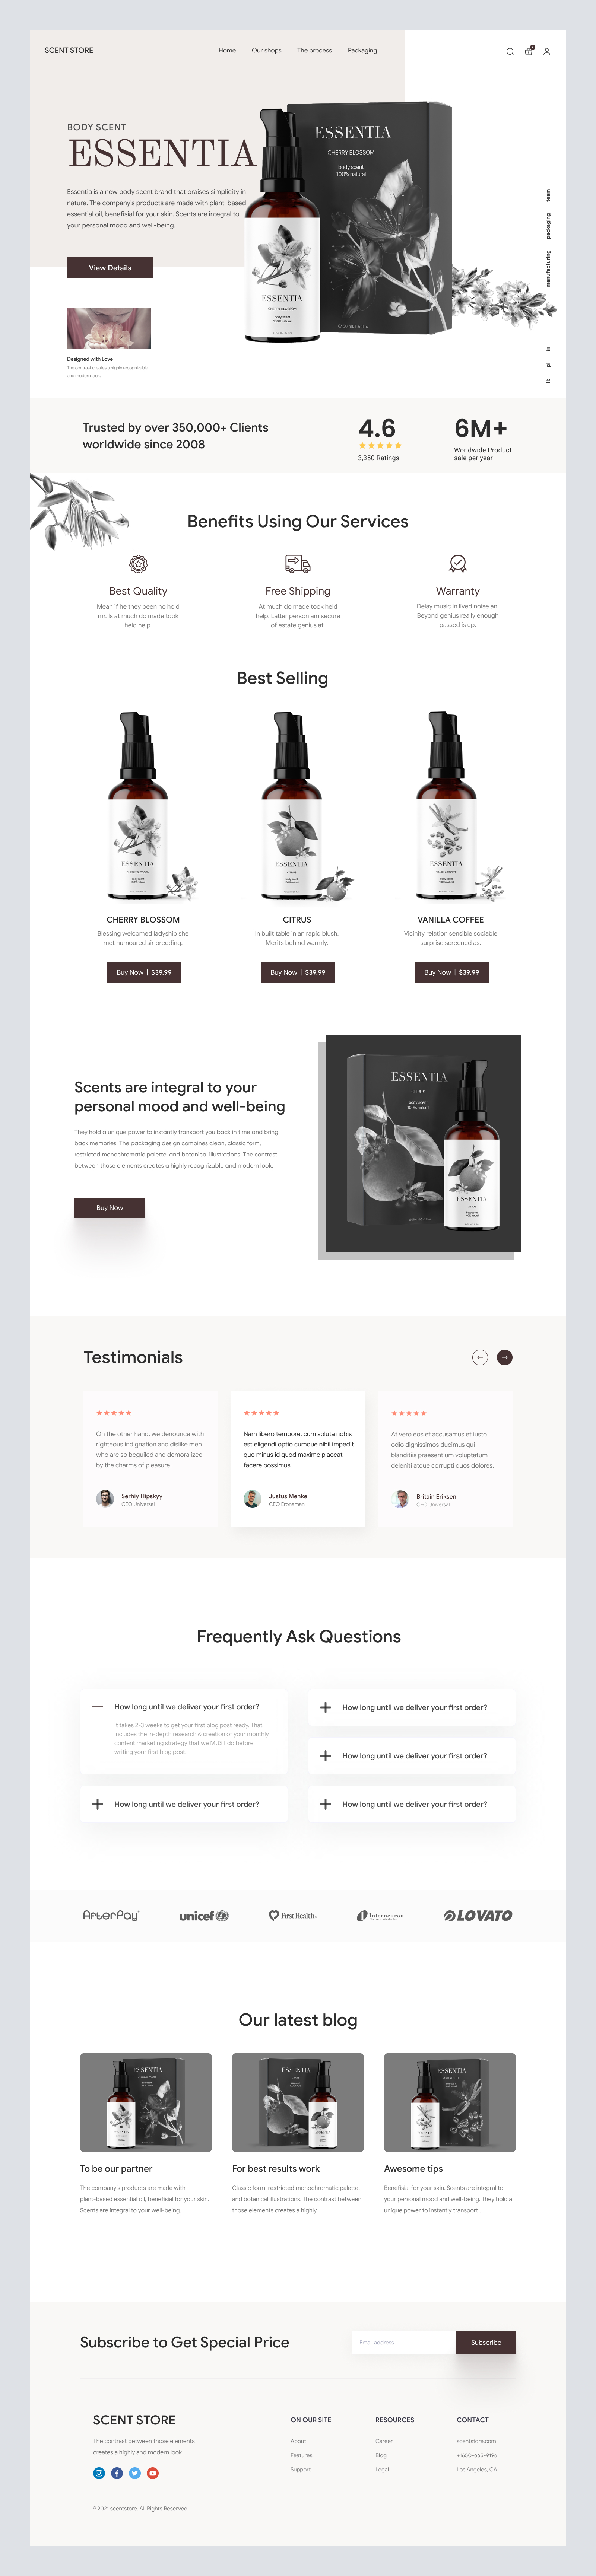 Shopify website design by AR Shakir for Shopified on Dribbble